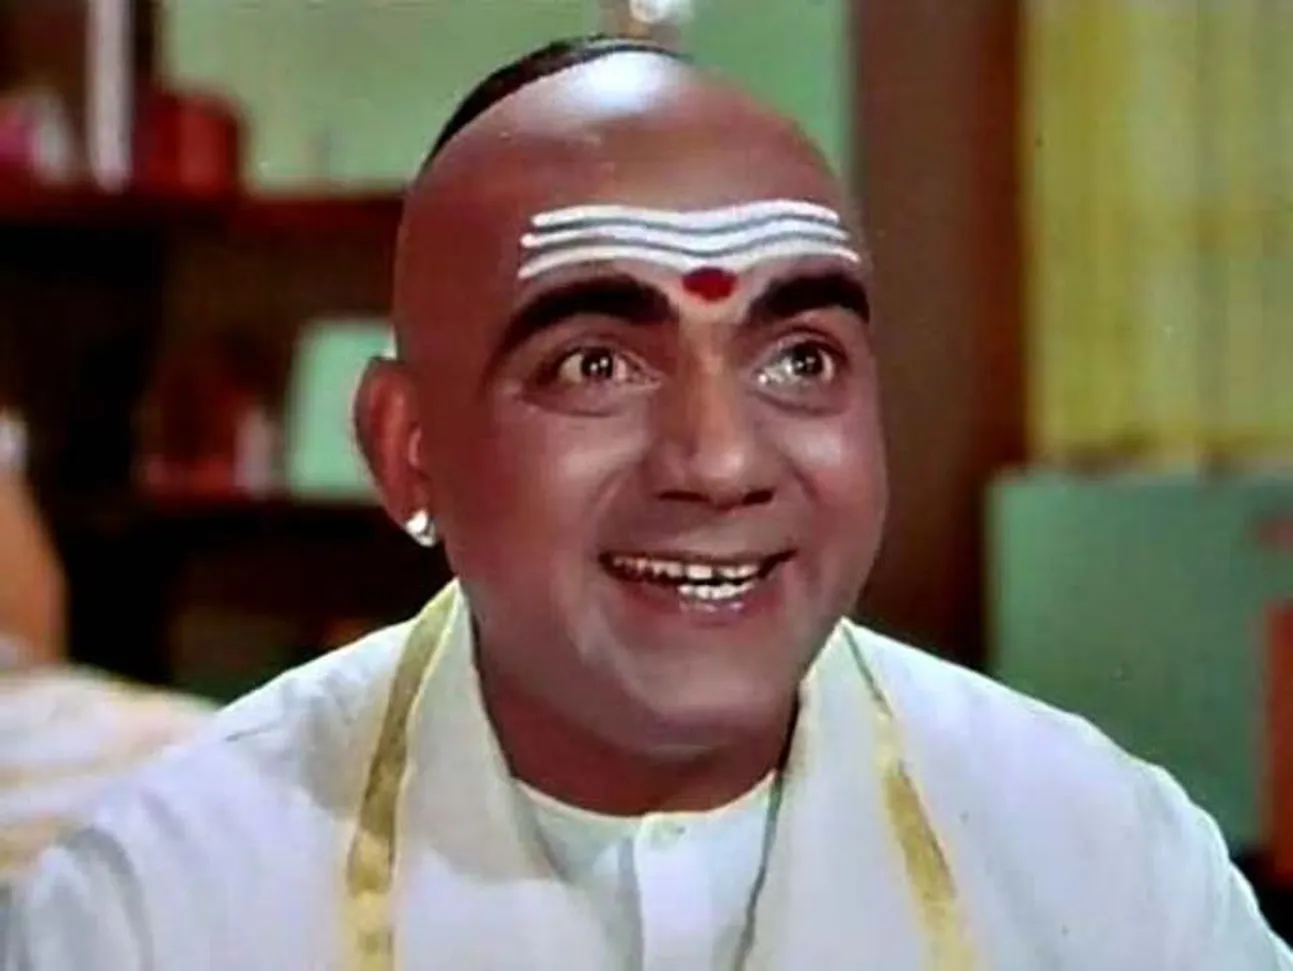 Mehmood Ali: The man who made people laugh and was often sad at heart